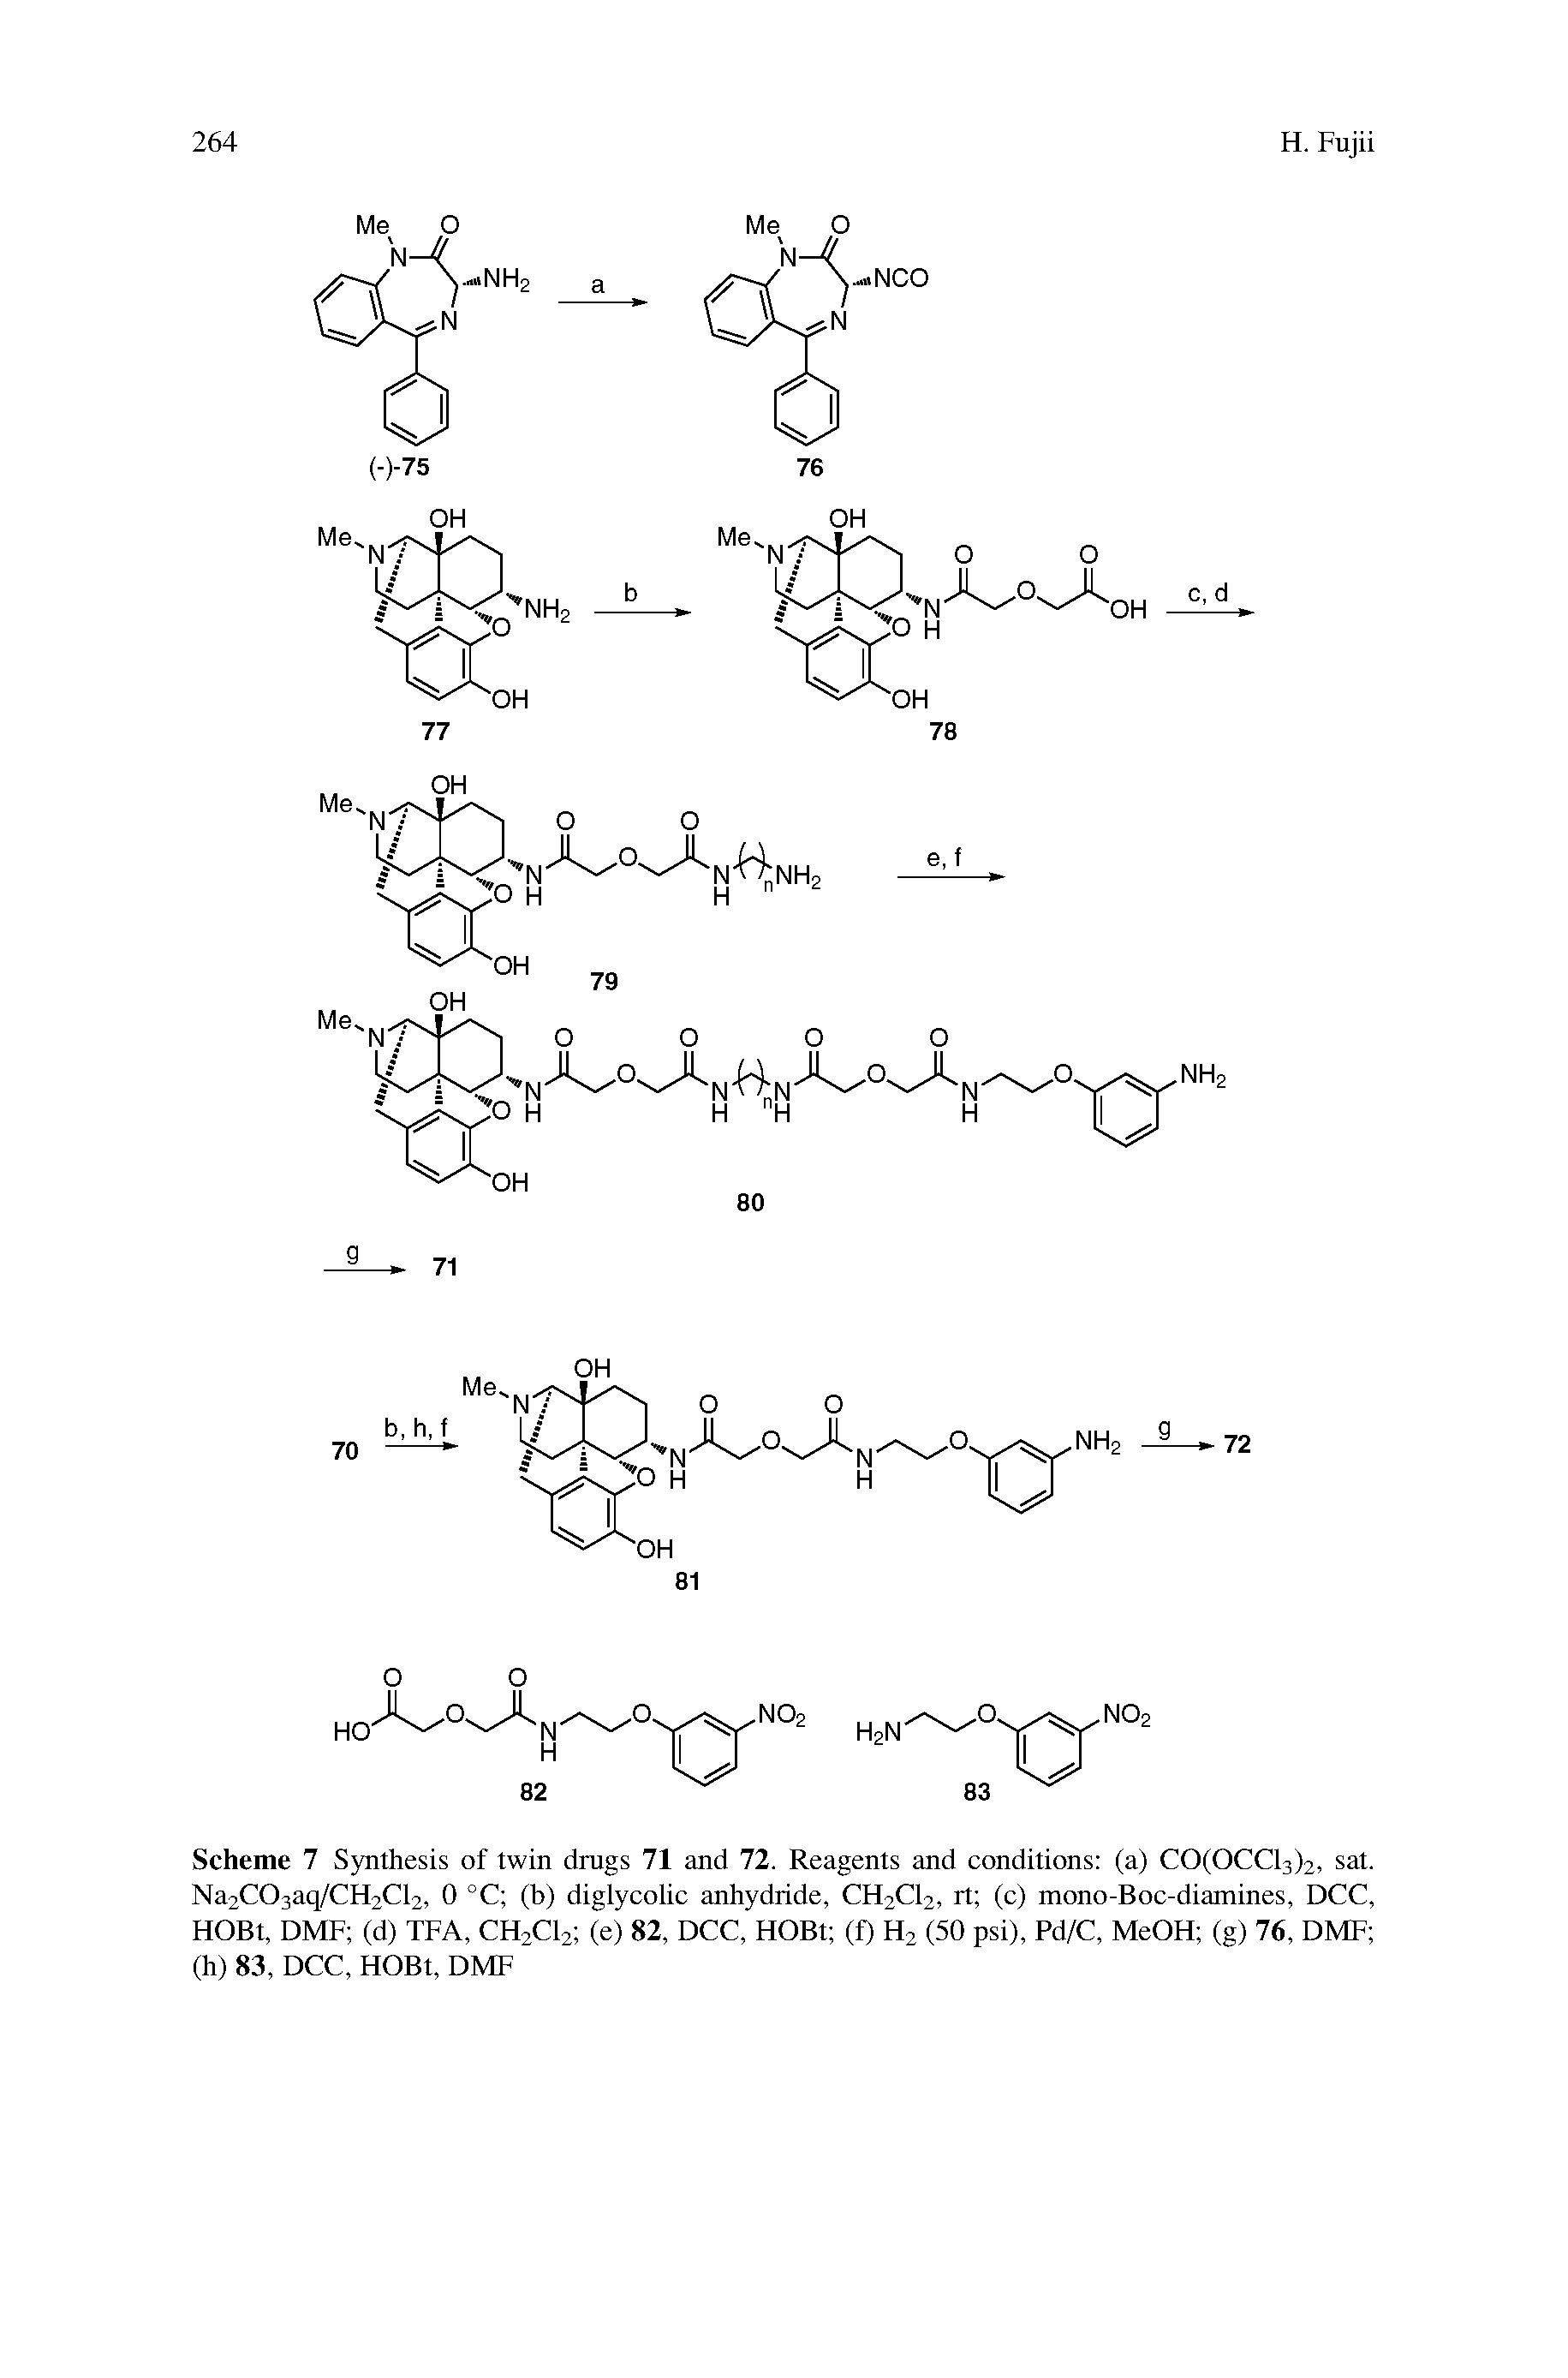 Scheme 7 Synthesis of twin drugs 71 and 72. Reagents and conditions (a) CO(OCCl3)2, sat. Na2C03aq/CH2Cl2, 0 °C (b) diglycolic anhydride, CH2C12, rt (c) mono-Boc-diamines, DCC, HOBt, DMF (d) TFA, CH2C12 (e) 82, DCC, HOBt (f) H2 (50 psi), Pd/C, MeOH (g) 76, DMF (h) 83, DCC, HOBt, DMF...